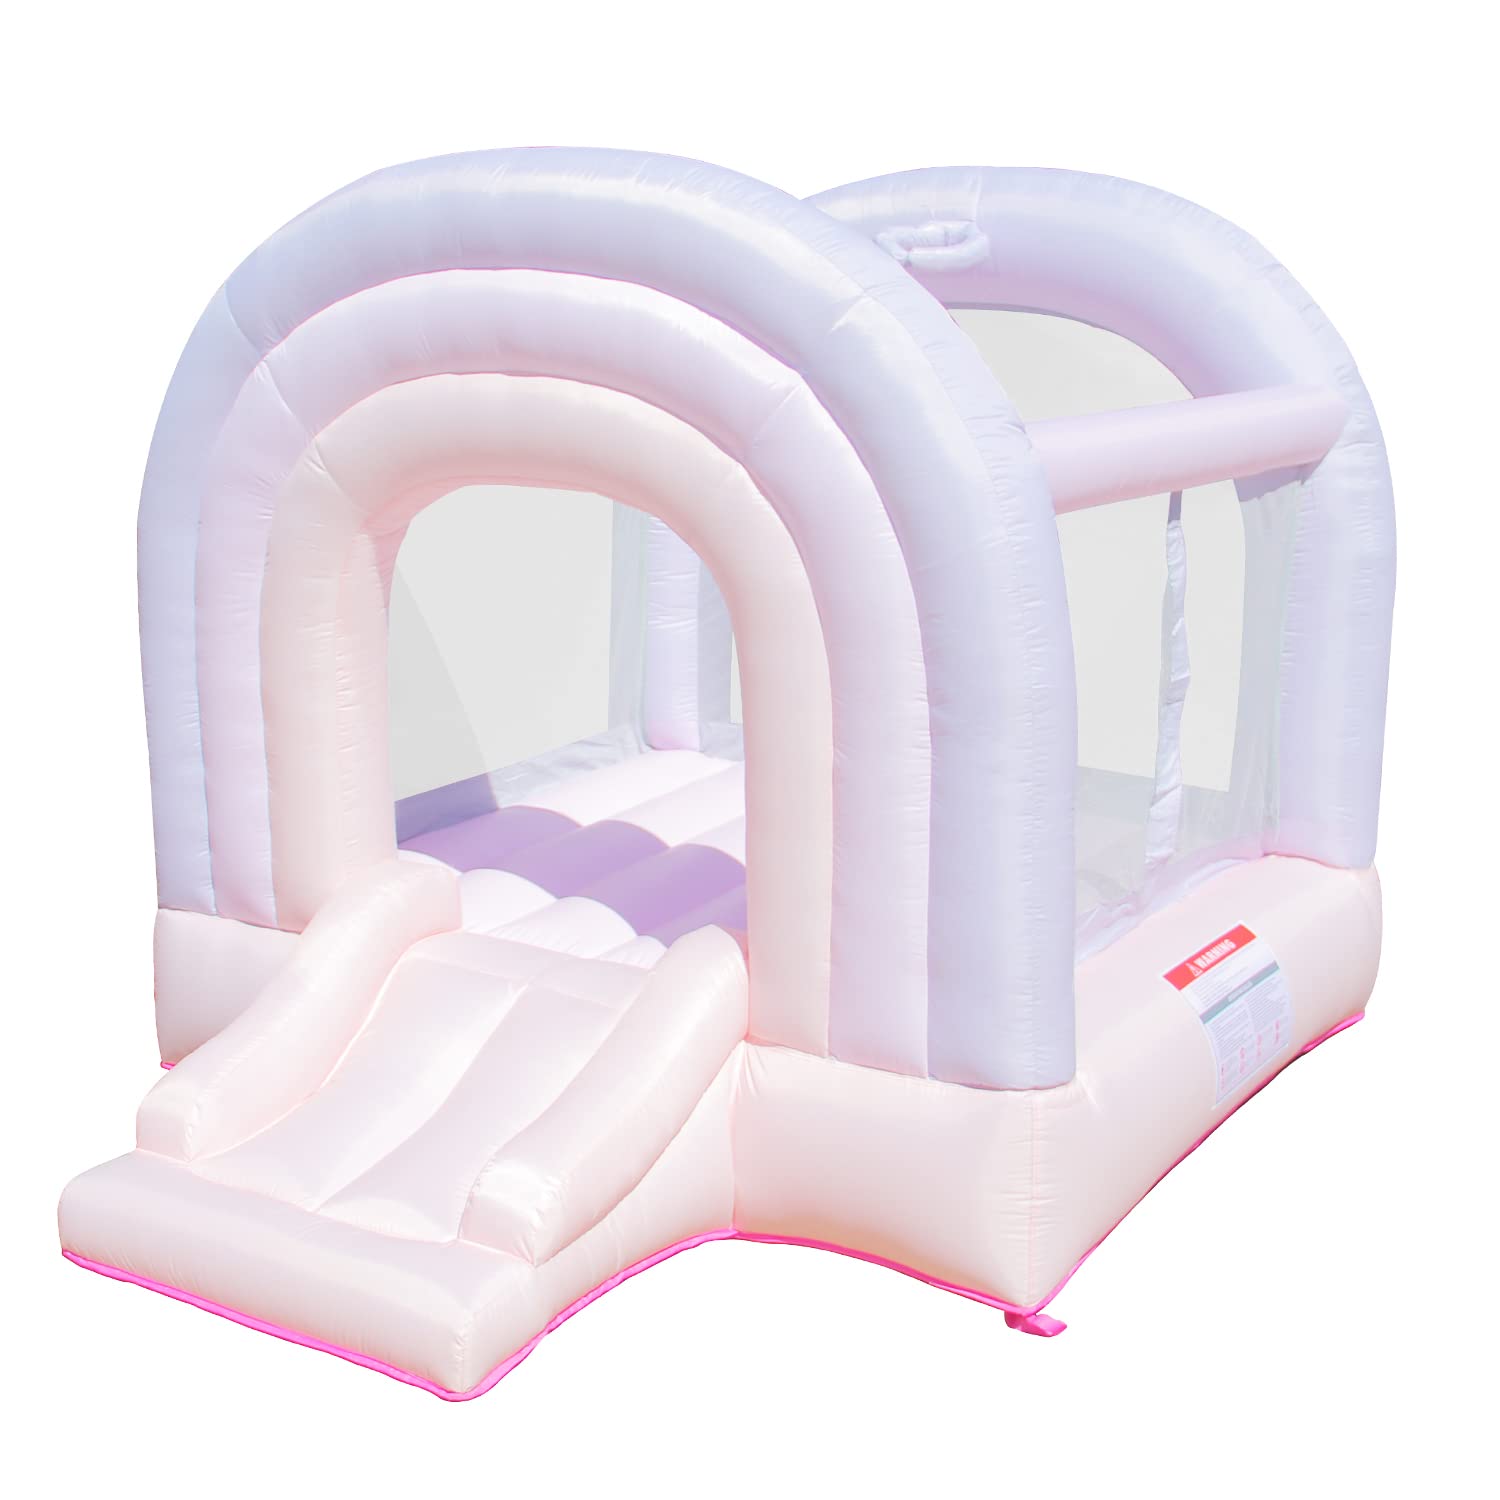 Bounceland Daydreamer Cotton Candy Bounce House, Pastel Bouncer with Slide, 8.9 ft L x 7.2 ft W x 6.7 ft H, UL Blower Included, Basketball Hoop, 30 Pastel Plastic Balls, Trendy Bouncer for Kids